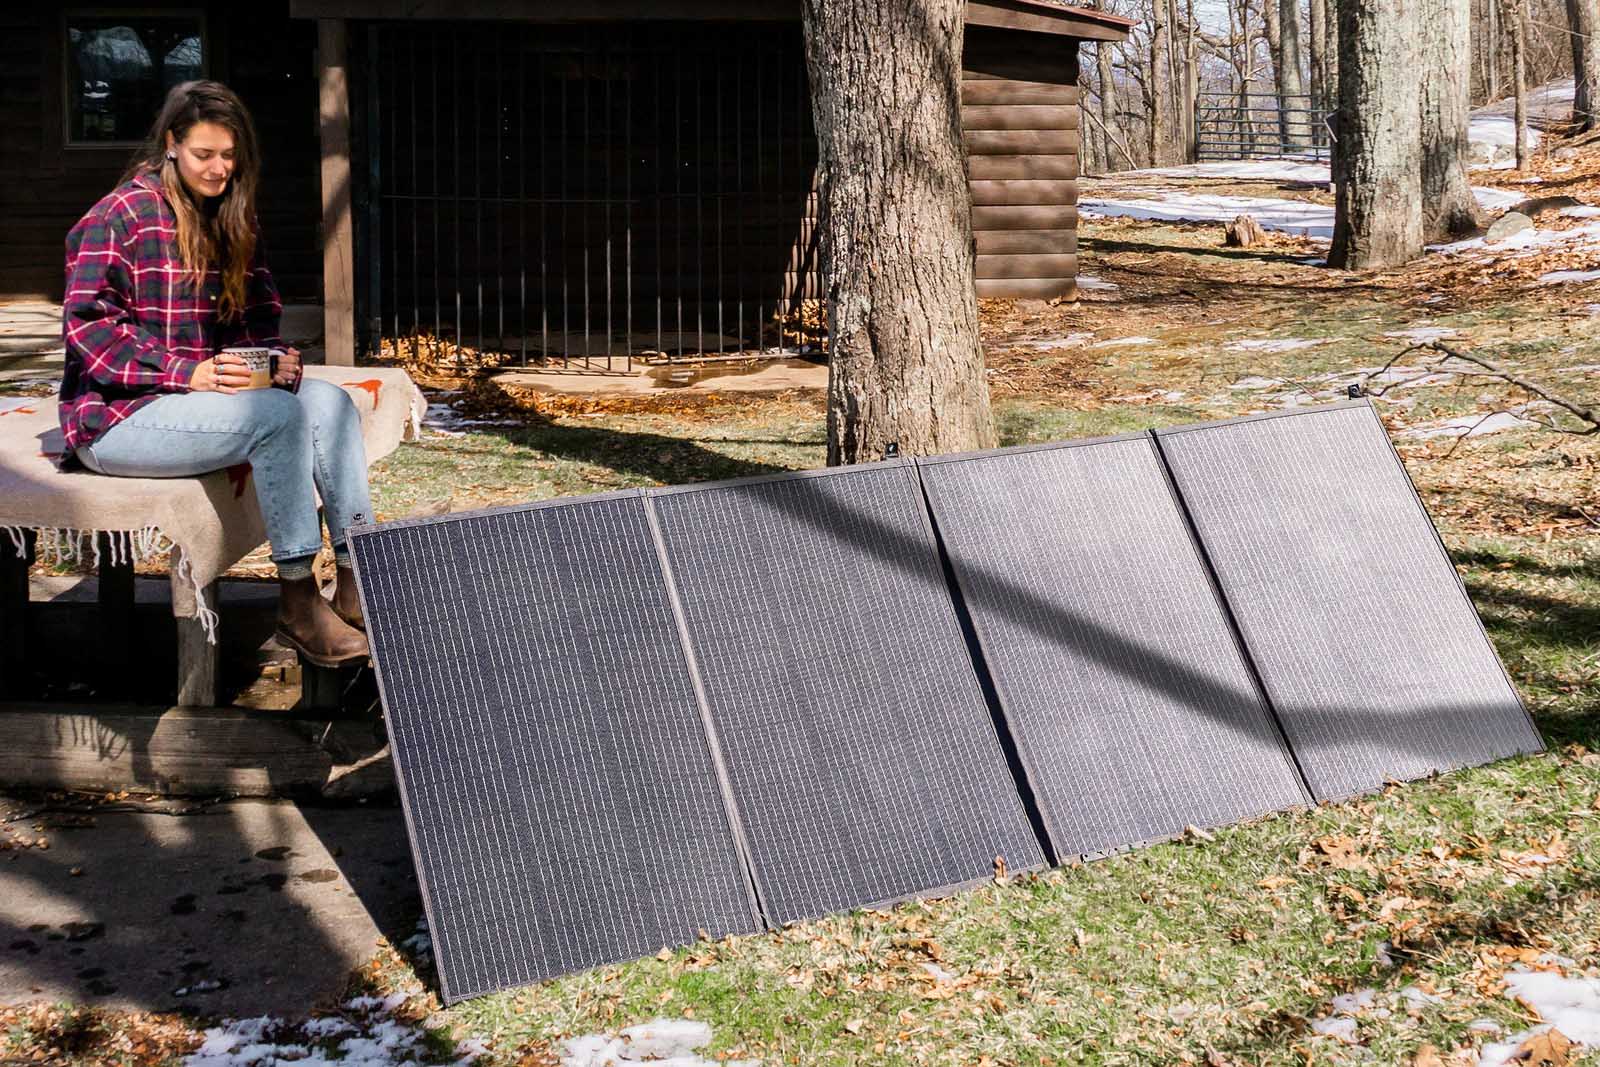 Woman with portable solar panels in snowy forest setting.